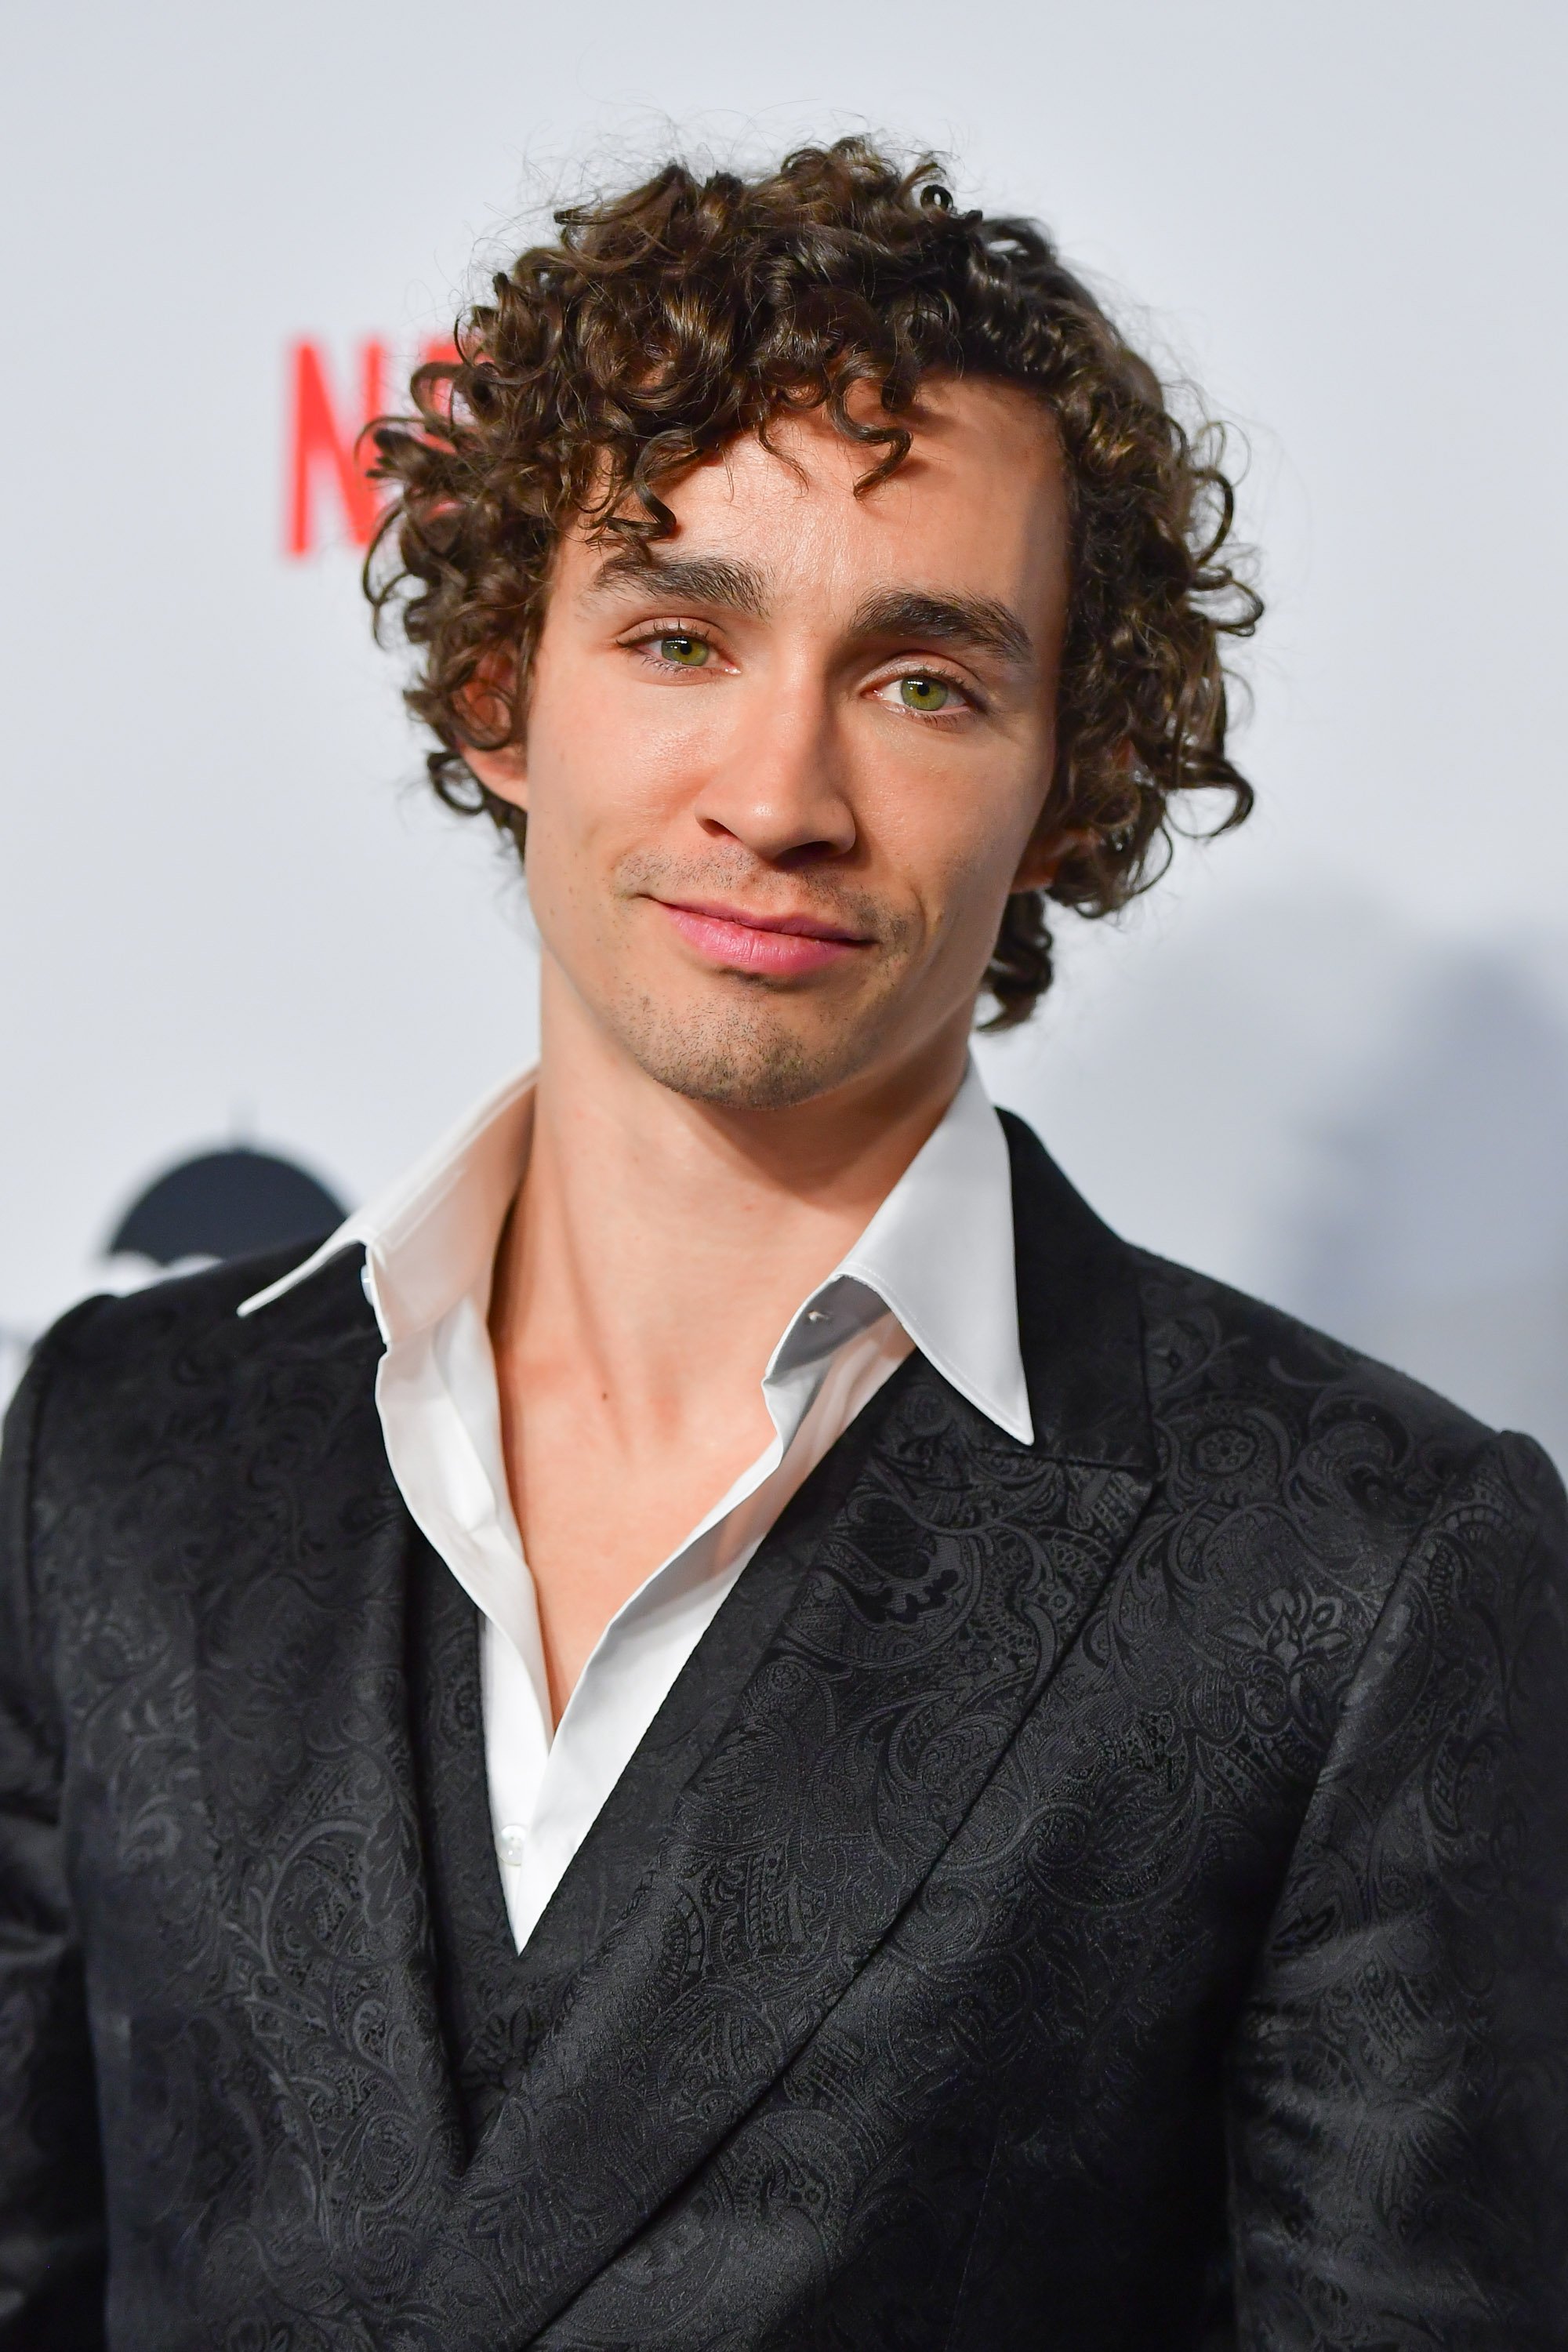 Robert Sheehan attends the premiere of Netflix's "The Umbrella Academy" at TIFF Bell Lightbox on February 14, 2019 in Toronto, Canada. | Source: Getty Images